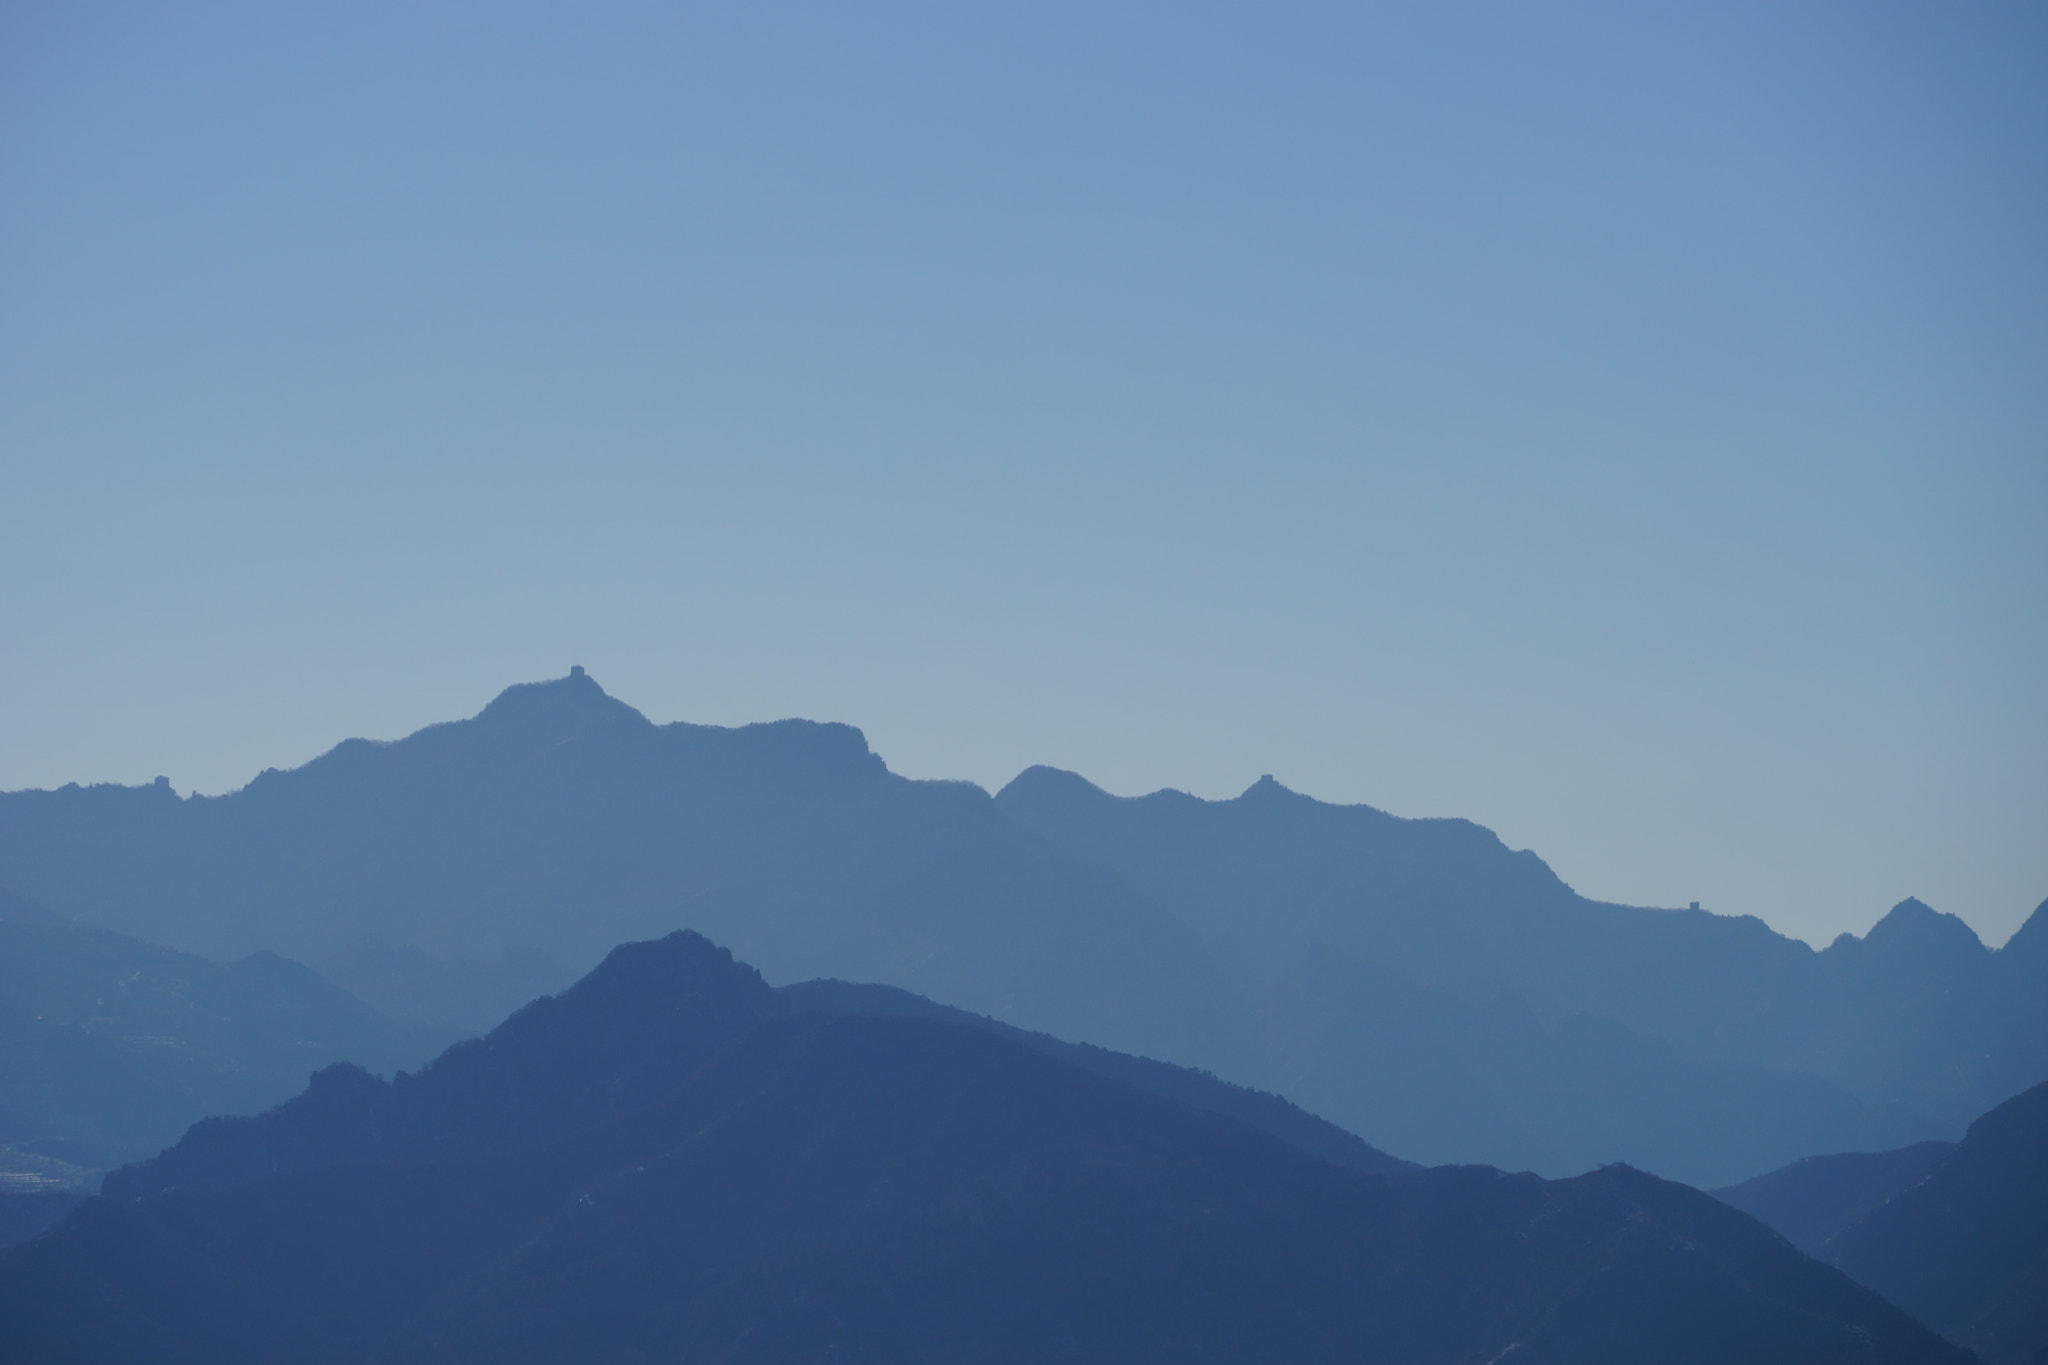 Sony a7 + Sony FE 70-200mm F4 G OSS sample photo. The mountain ranges photography